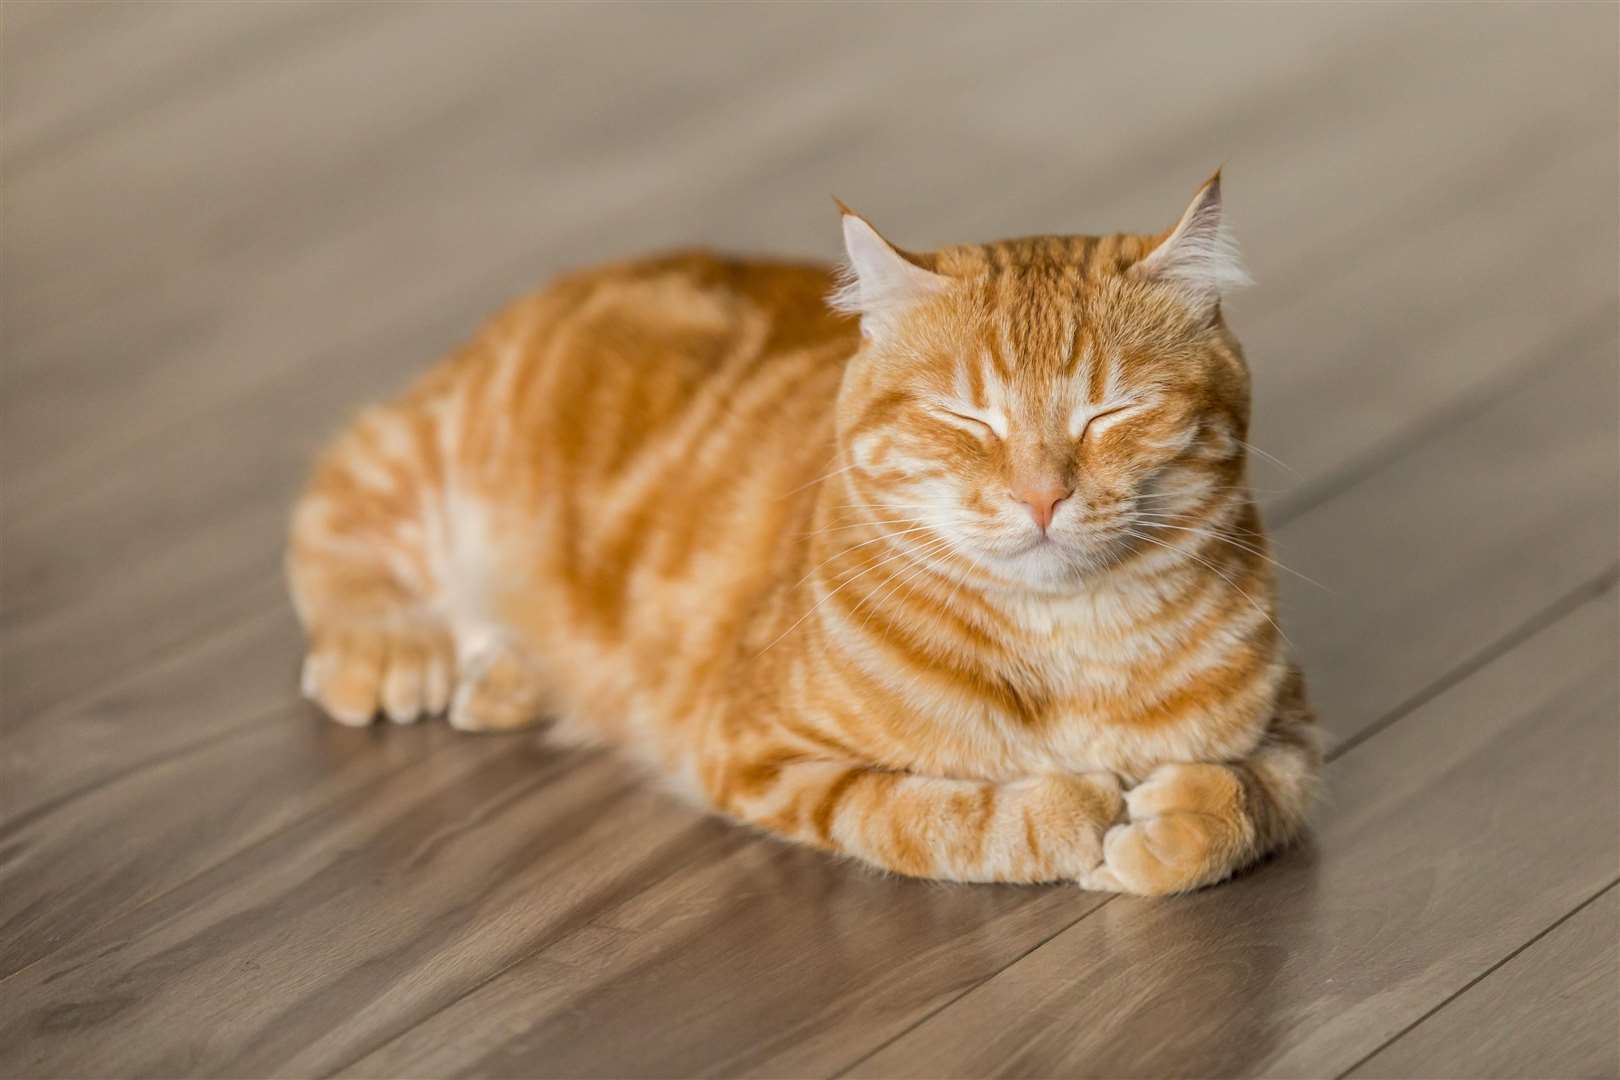 Even if domesticated cats don’t need to catch their food to survive, they cannot resist the natural urge to kill and retrieve. Picture: Micheal Sum, unsplash